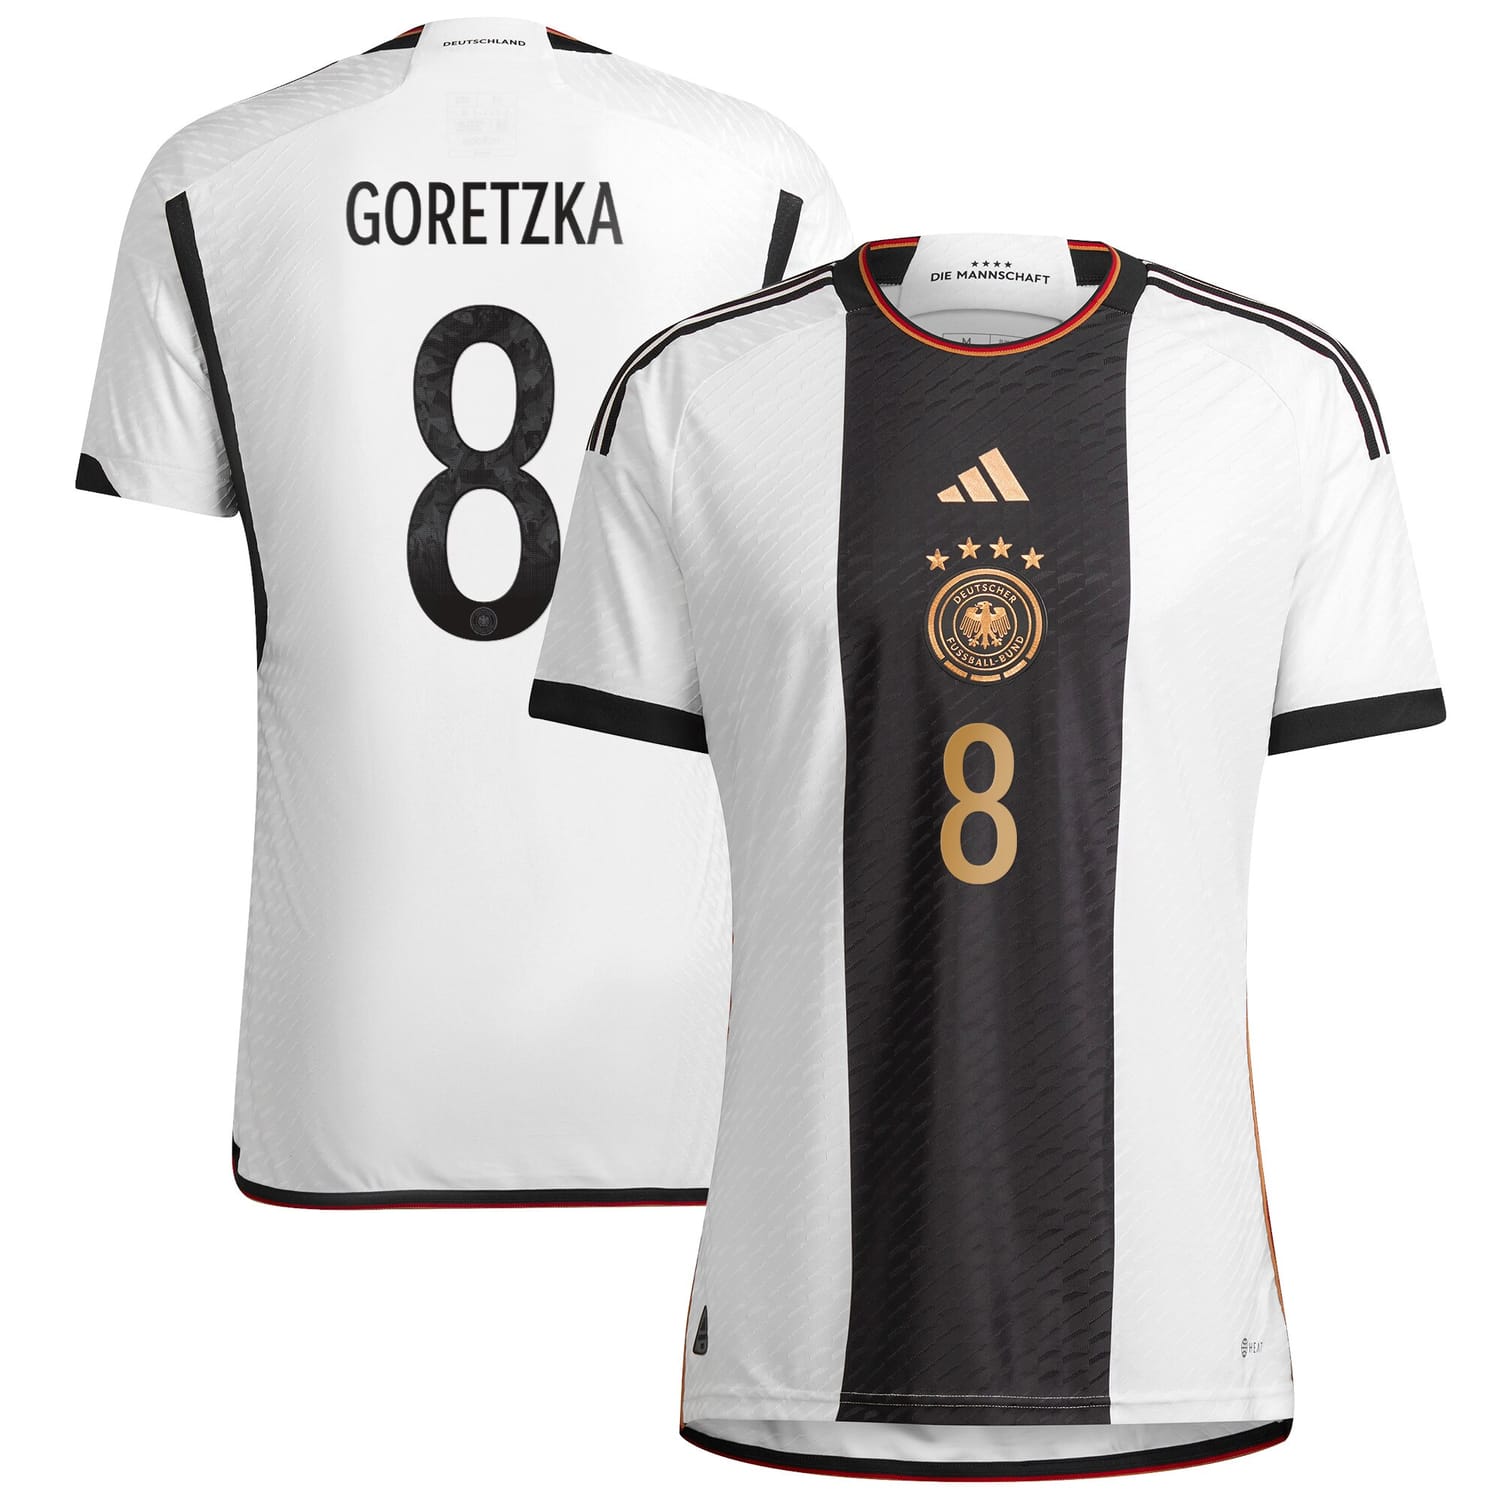 Germany National Team Home Authentic Jersey Shirt player Leon Goretzka 8 printing for Men